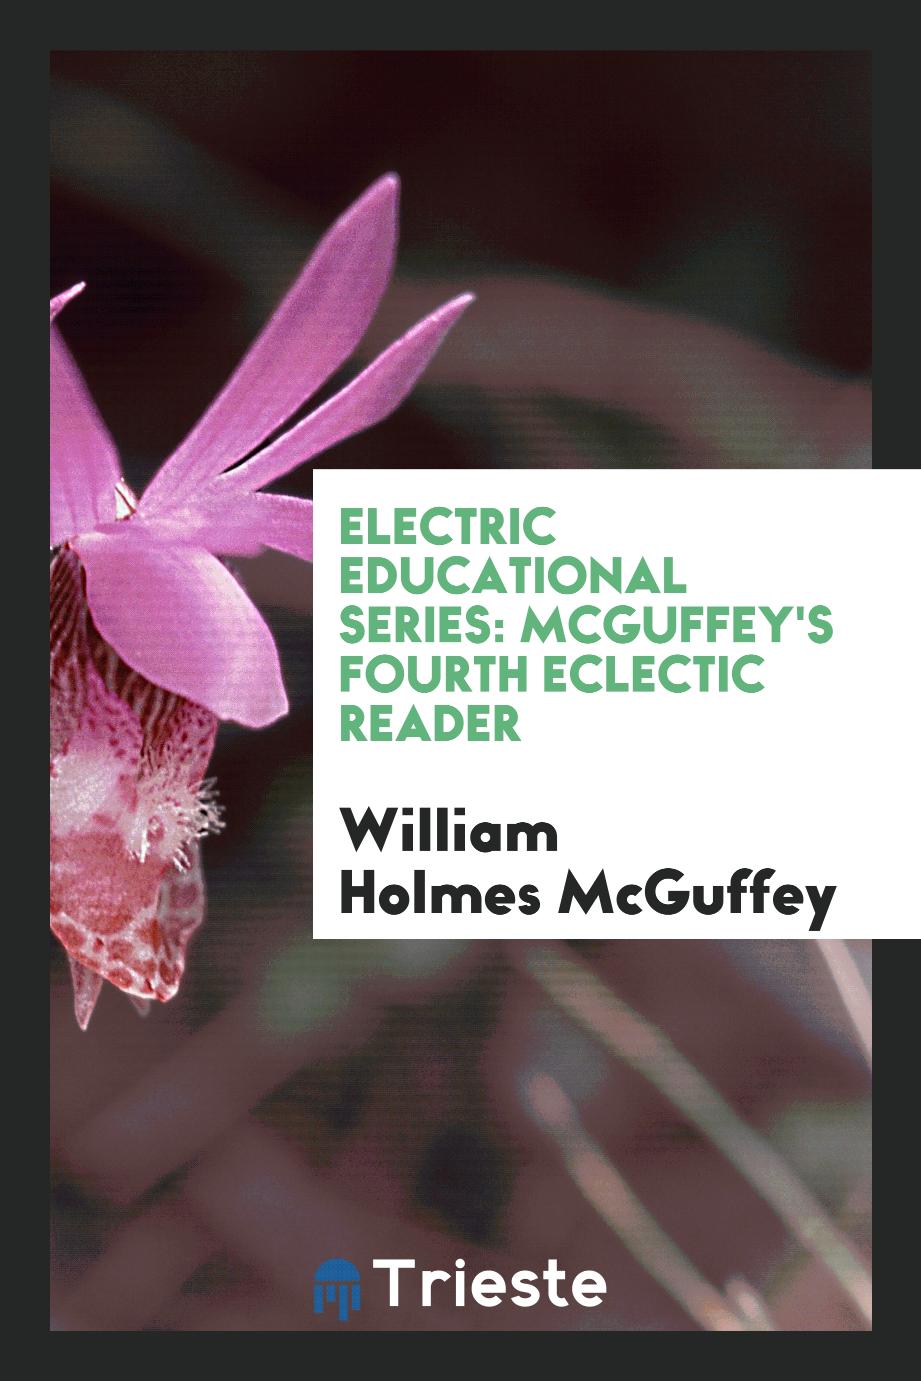 Electric Educational Series: McGuffey's Fourth Eclectic Reader